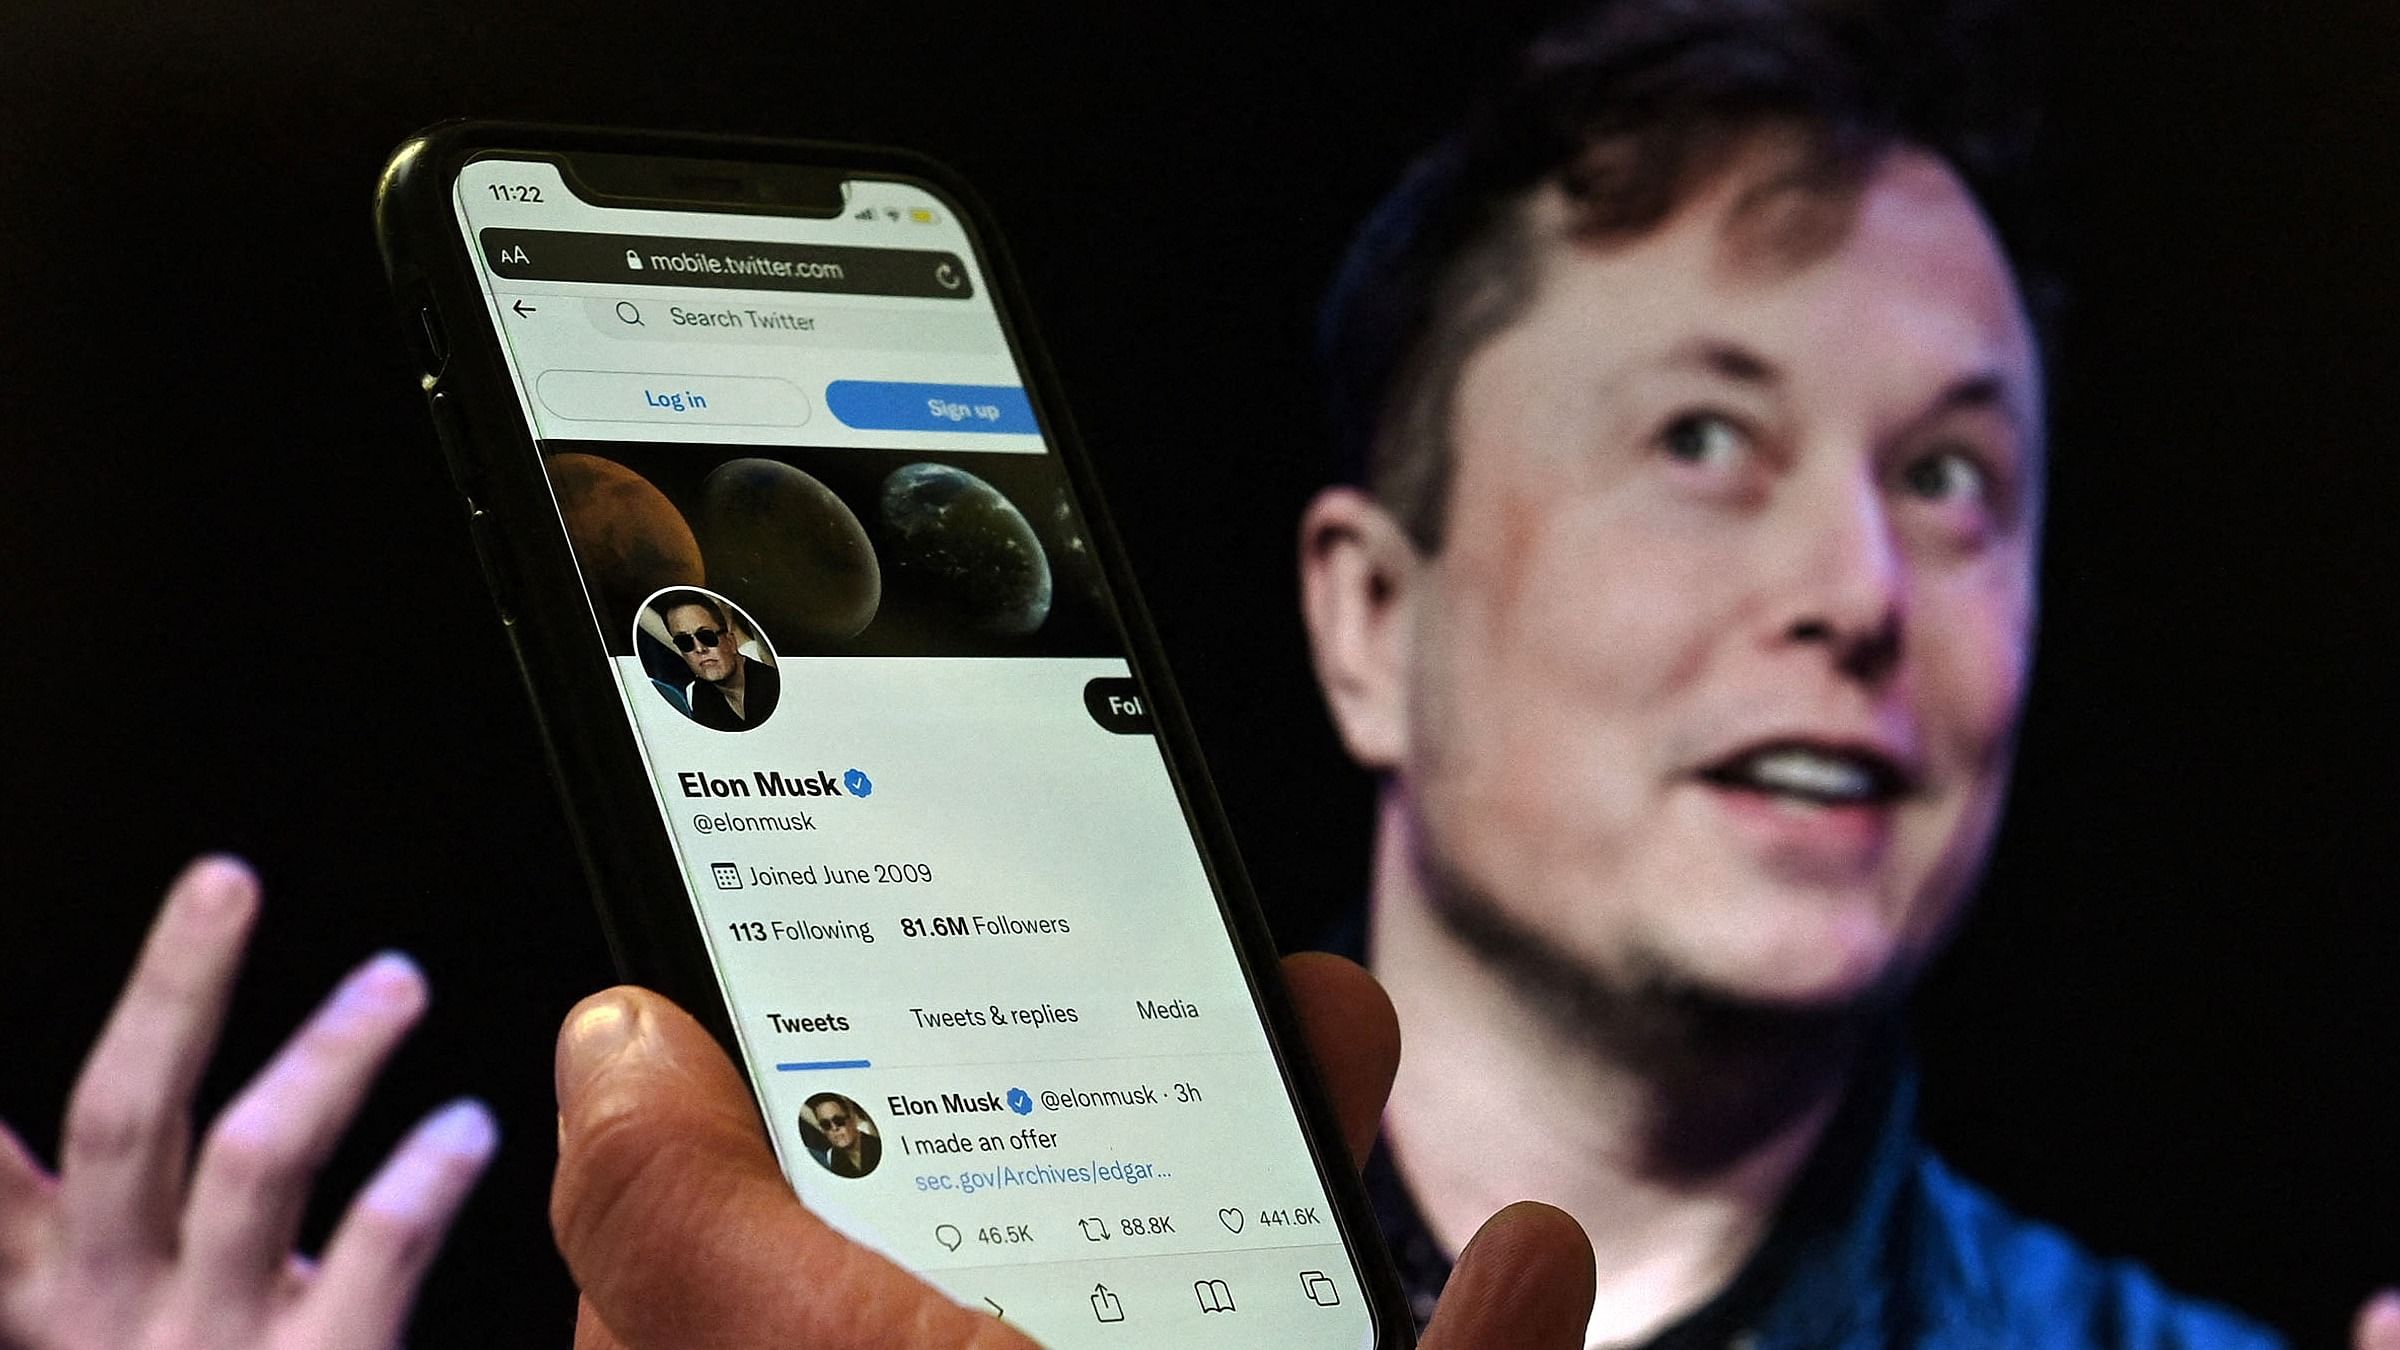 In this file photo illustration, a phone screen displays the Twitter account of Elon Musk with a photo of him shown in the background. Credit: AFP Photo